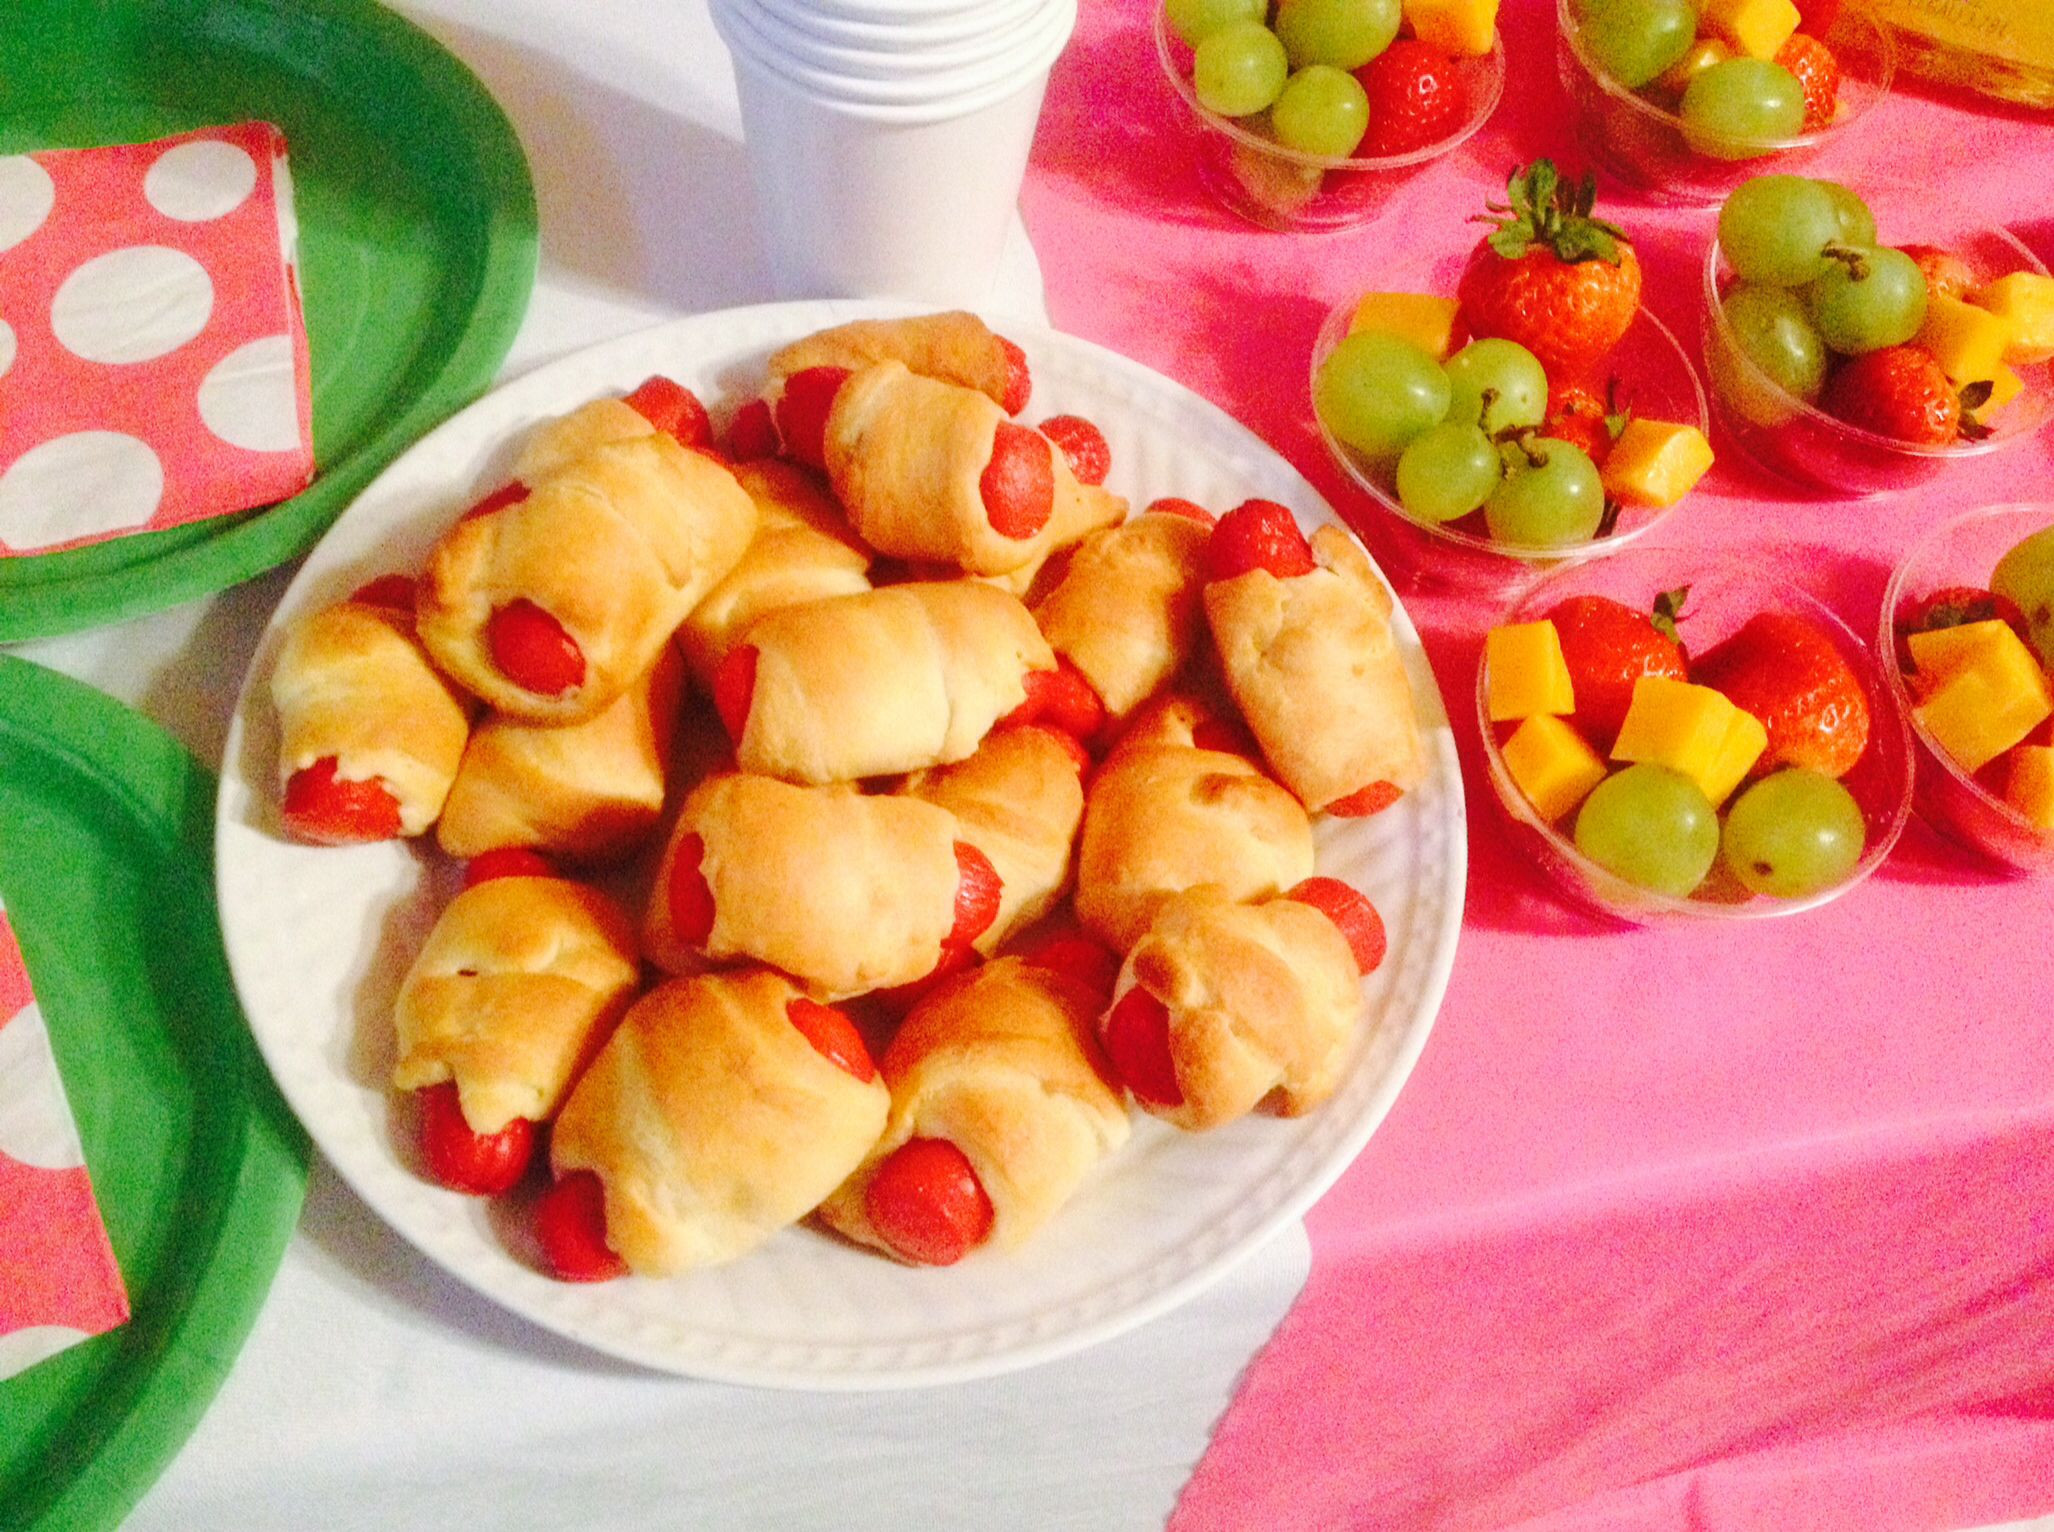 Childrens Princess Party Food Ideas
 Girls tea party food ideas